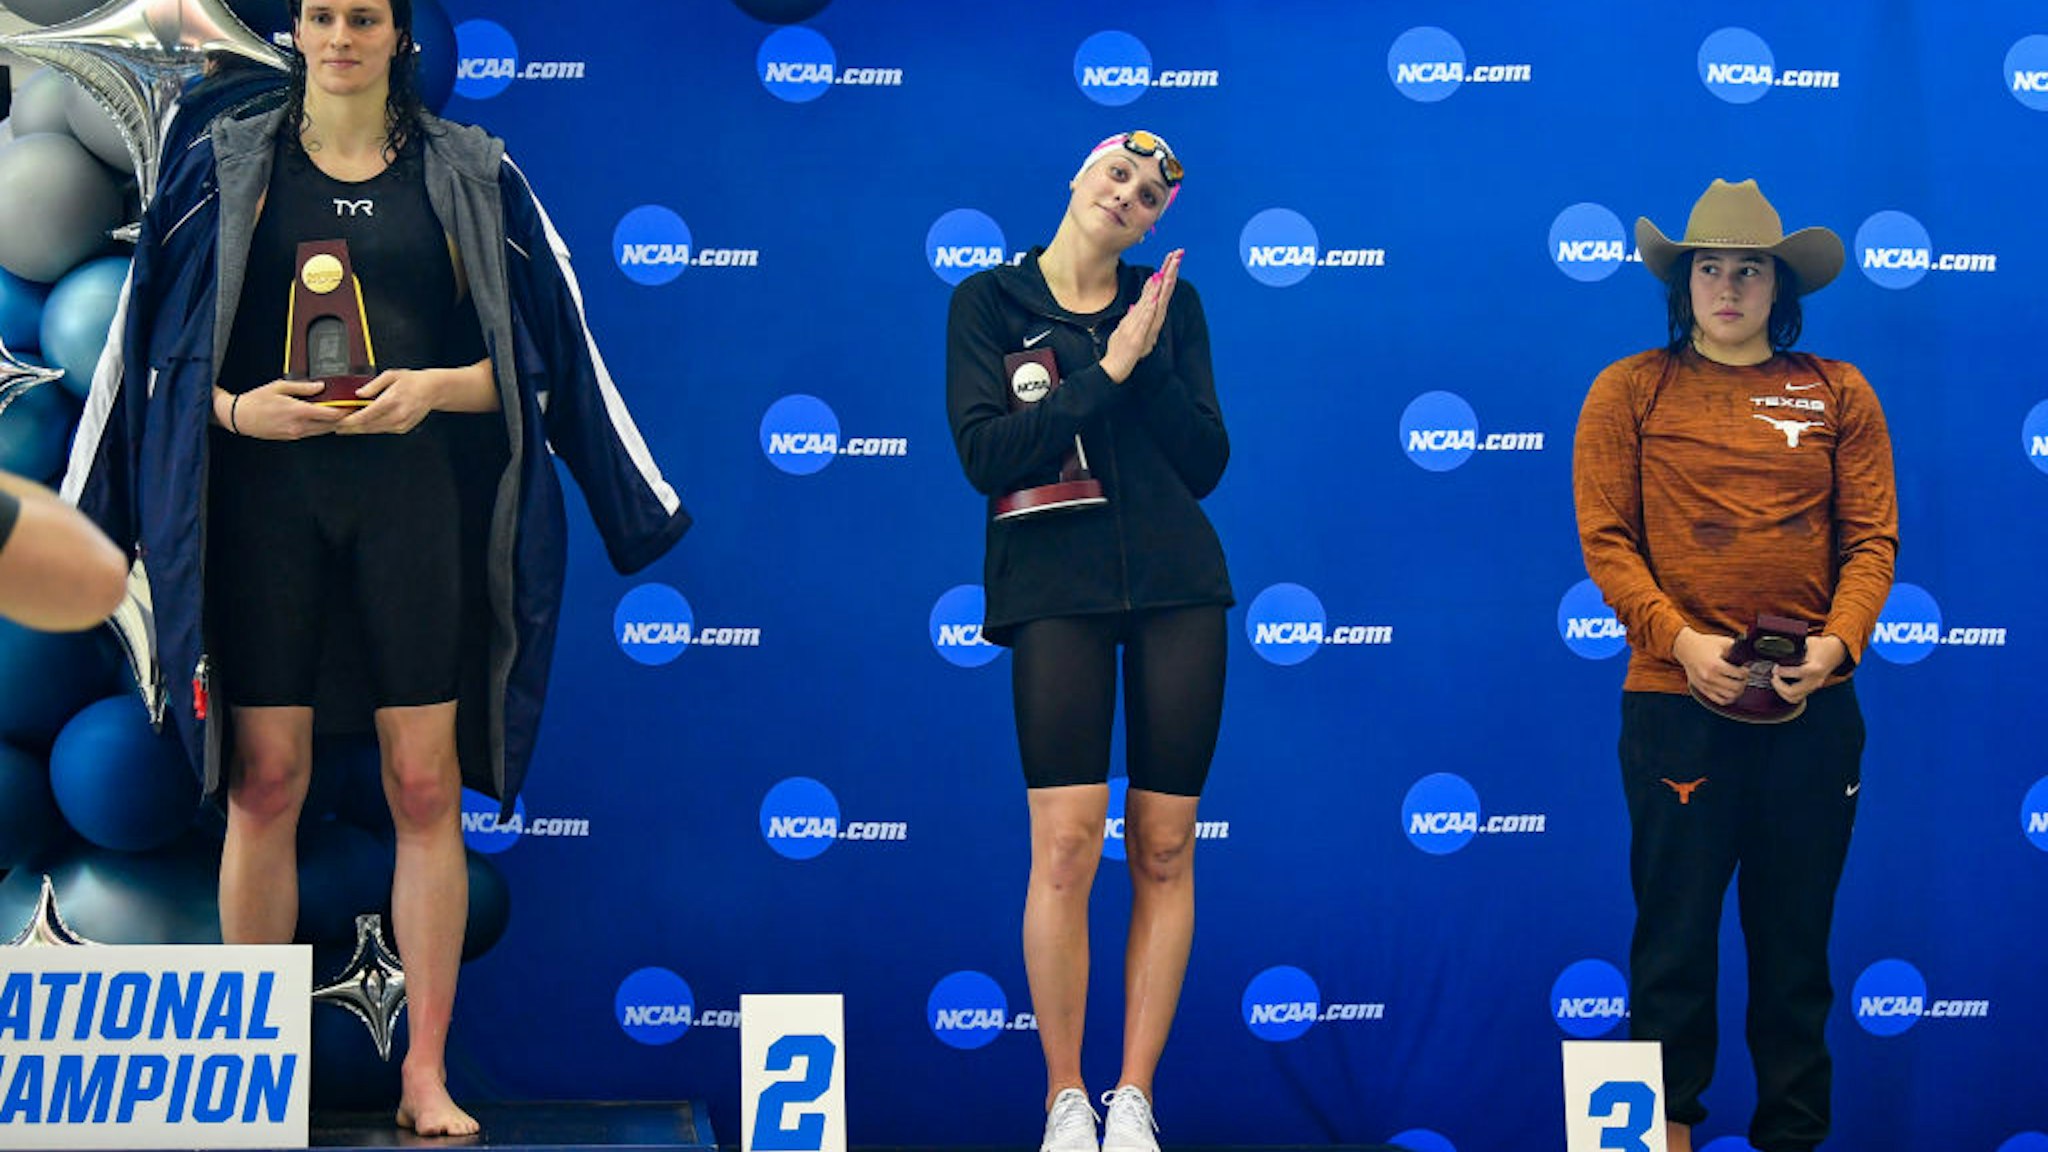 University of Pennsylvania swimmer Lia Thomas accepts the winning trophy for the 500 Freestyle finals as second place finisher Emma Weyant and third place finisher Erica Sullivan watch during the NCAA Swimming and Diving Championships on March 17th, 2022 at the McAuley Aquatic Center in Atlanta Georgia.